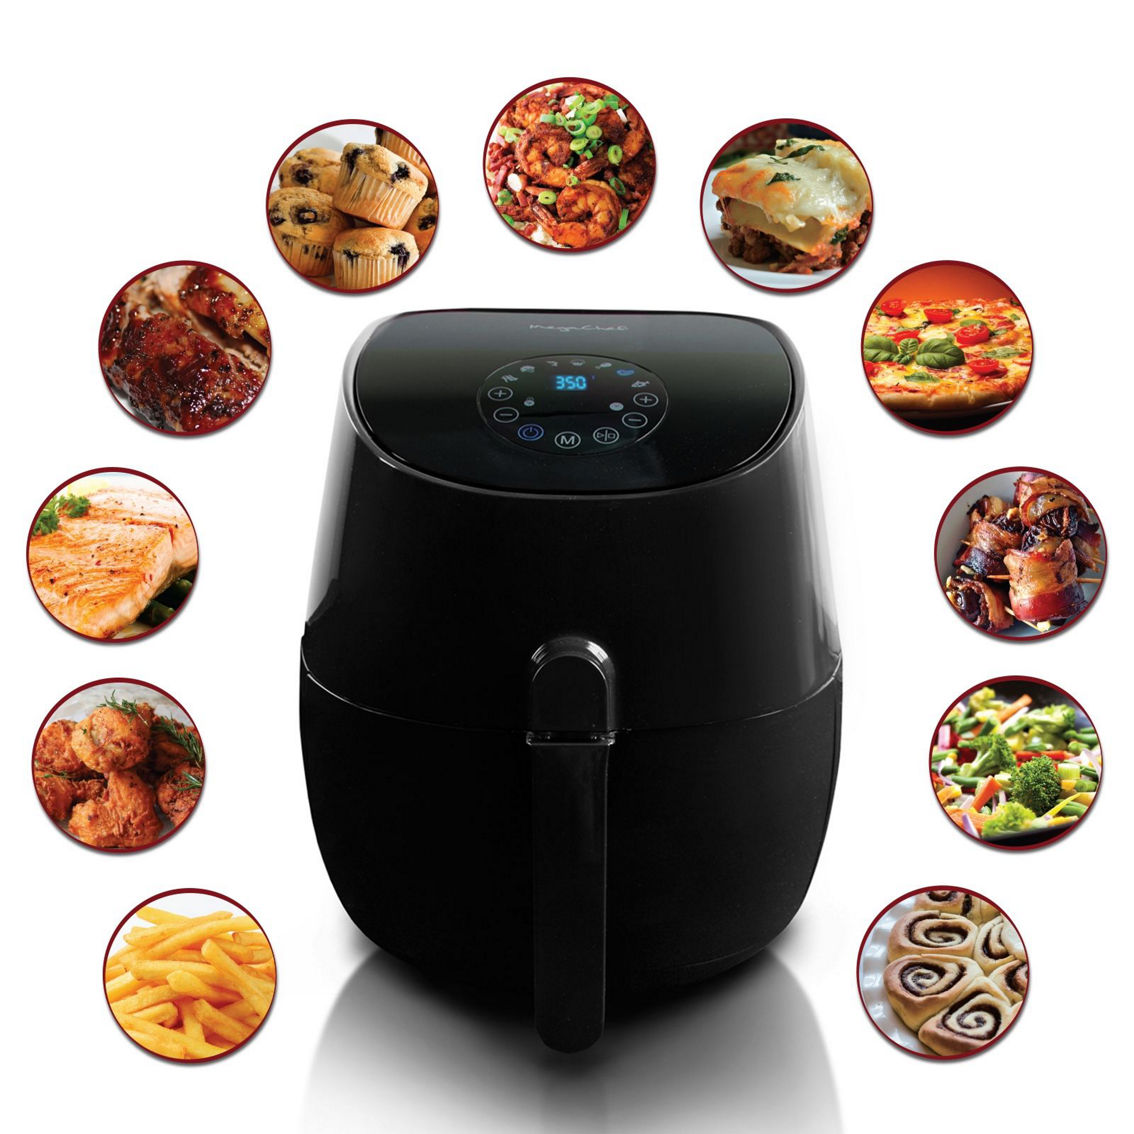 MegaChef 3.5 Quart Airfryer And Multicooker With 7 Pre-programmed Settings in Sl - Image 4 of 5